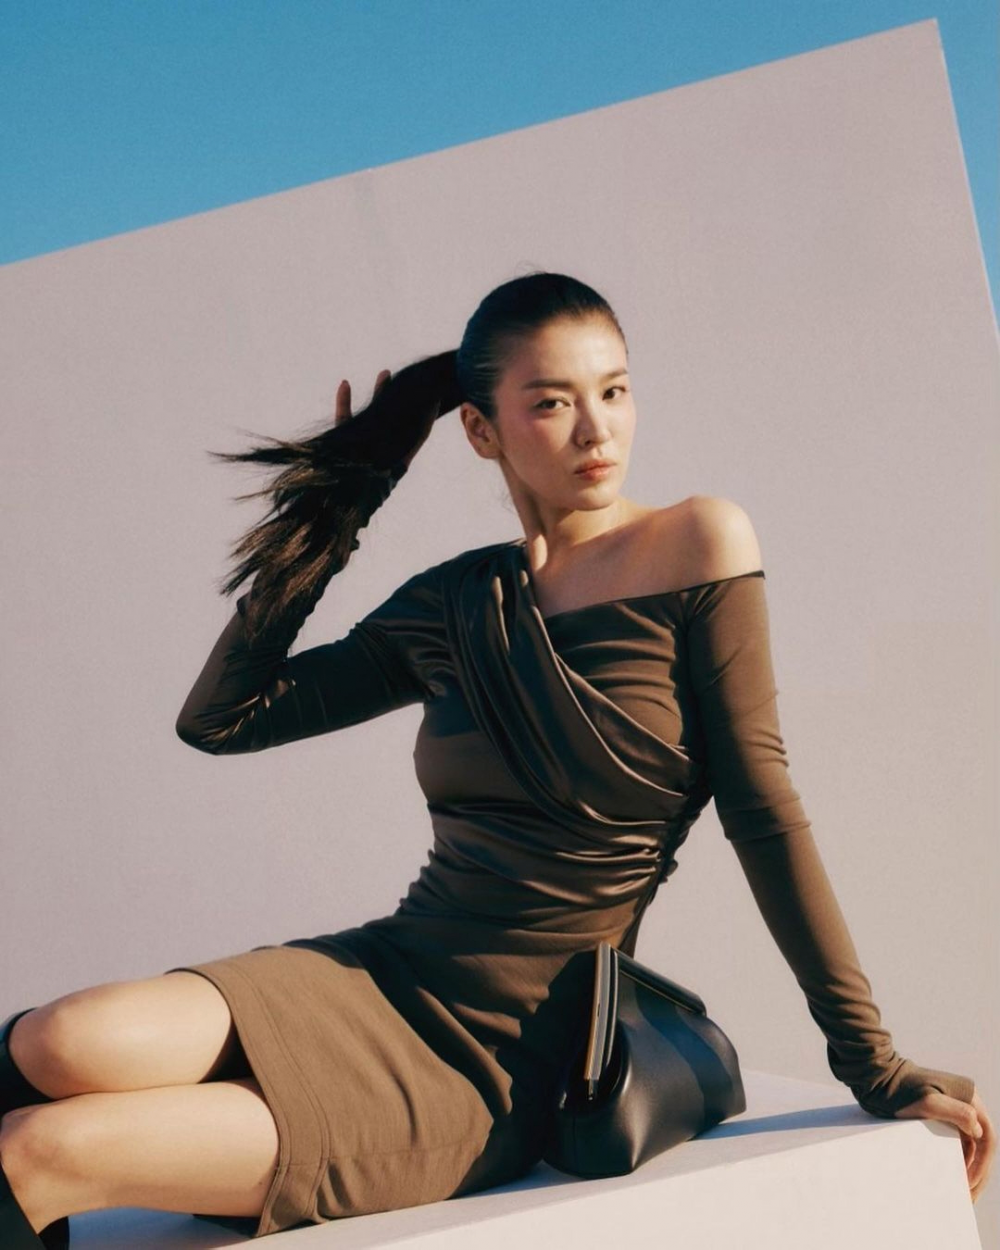 Song Hye Kyo B cuts of her 'Vogue Korea' pictorial